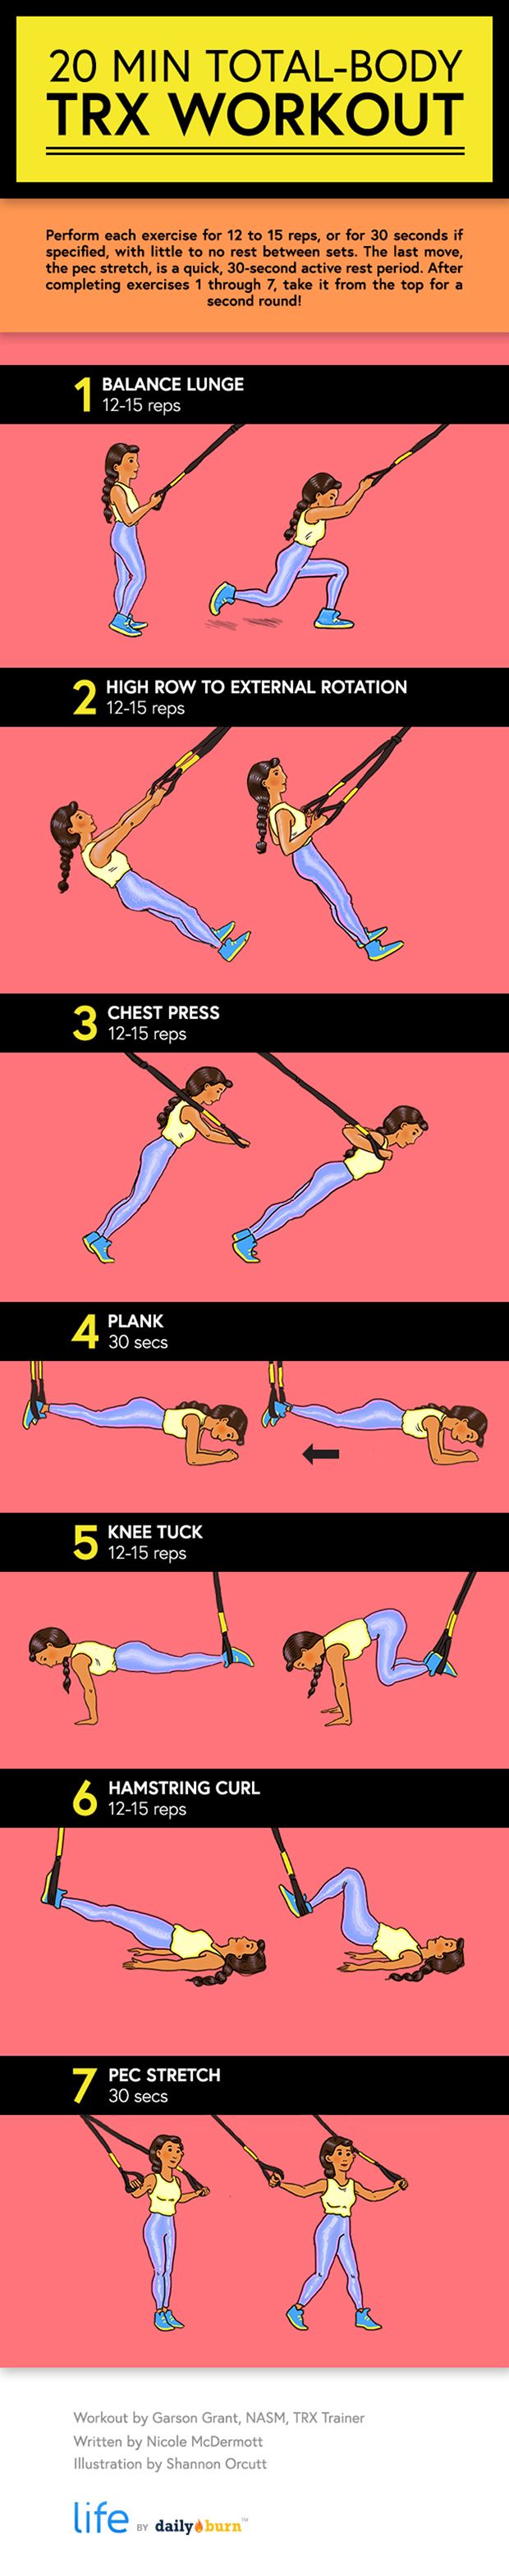 Killer Crunchless Workout #sixpack